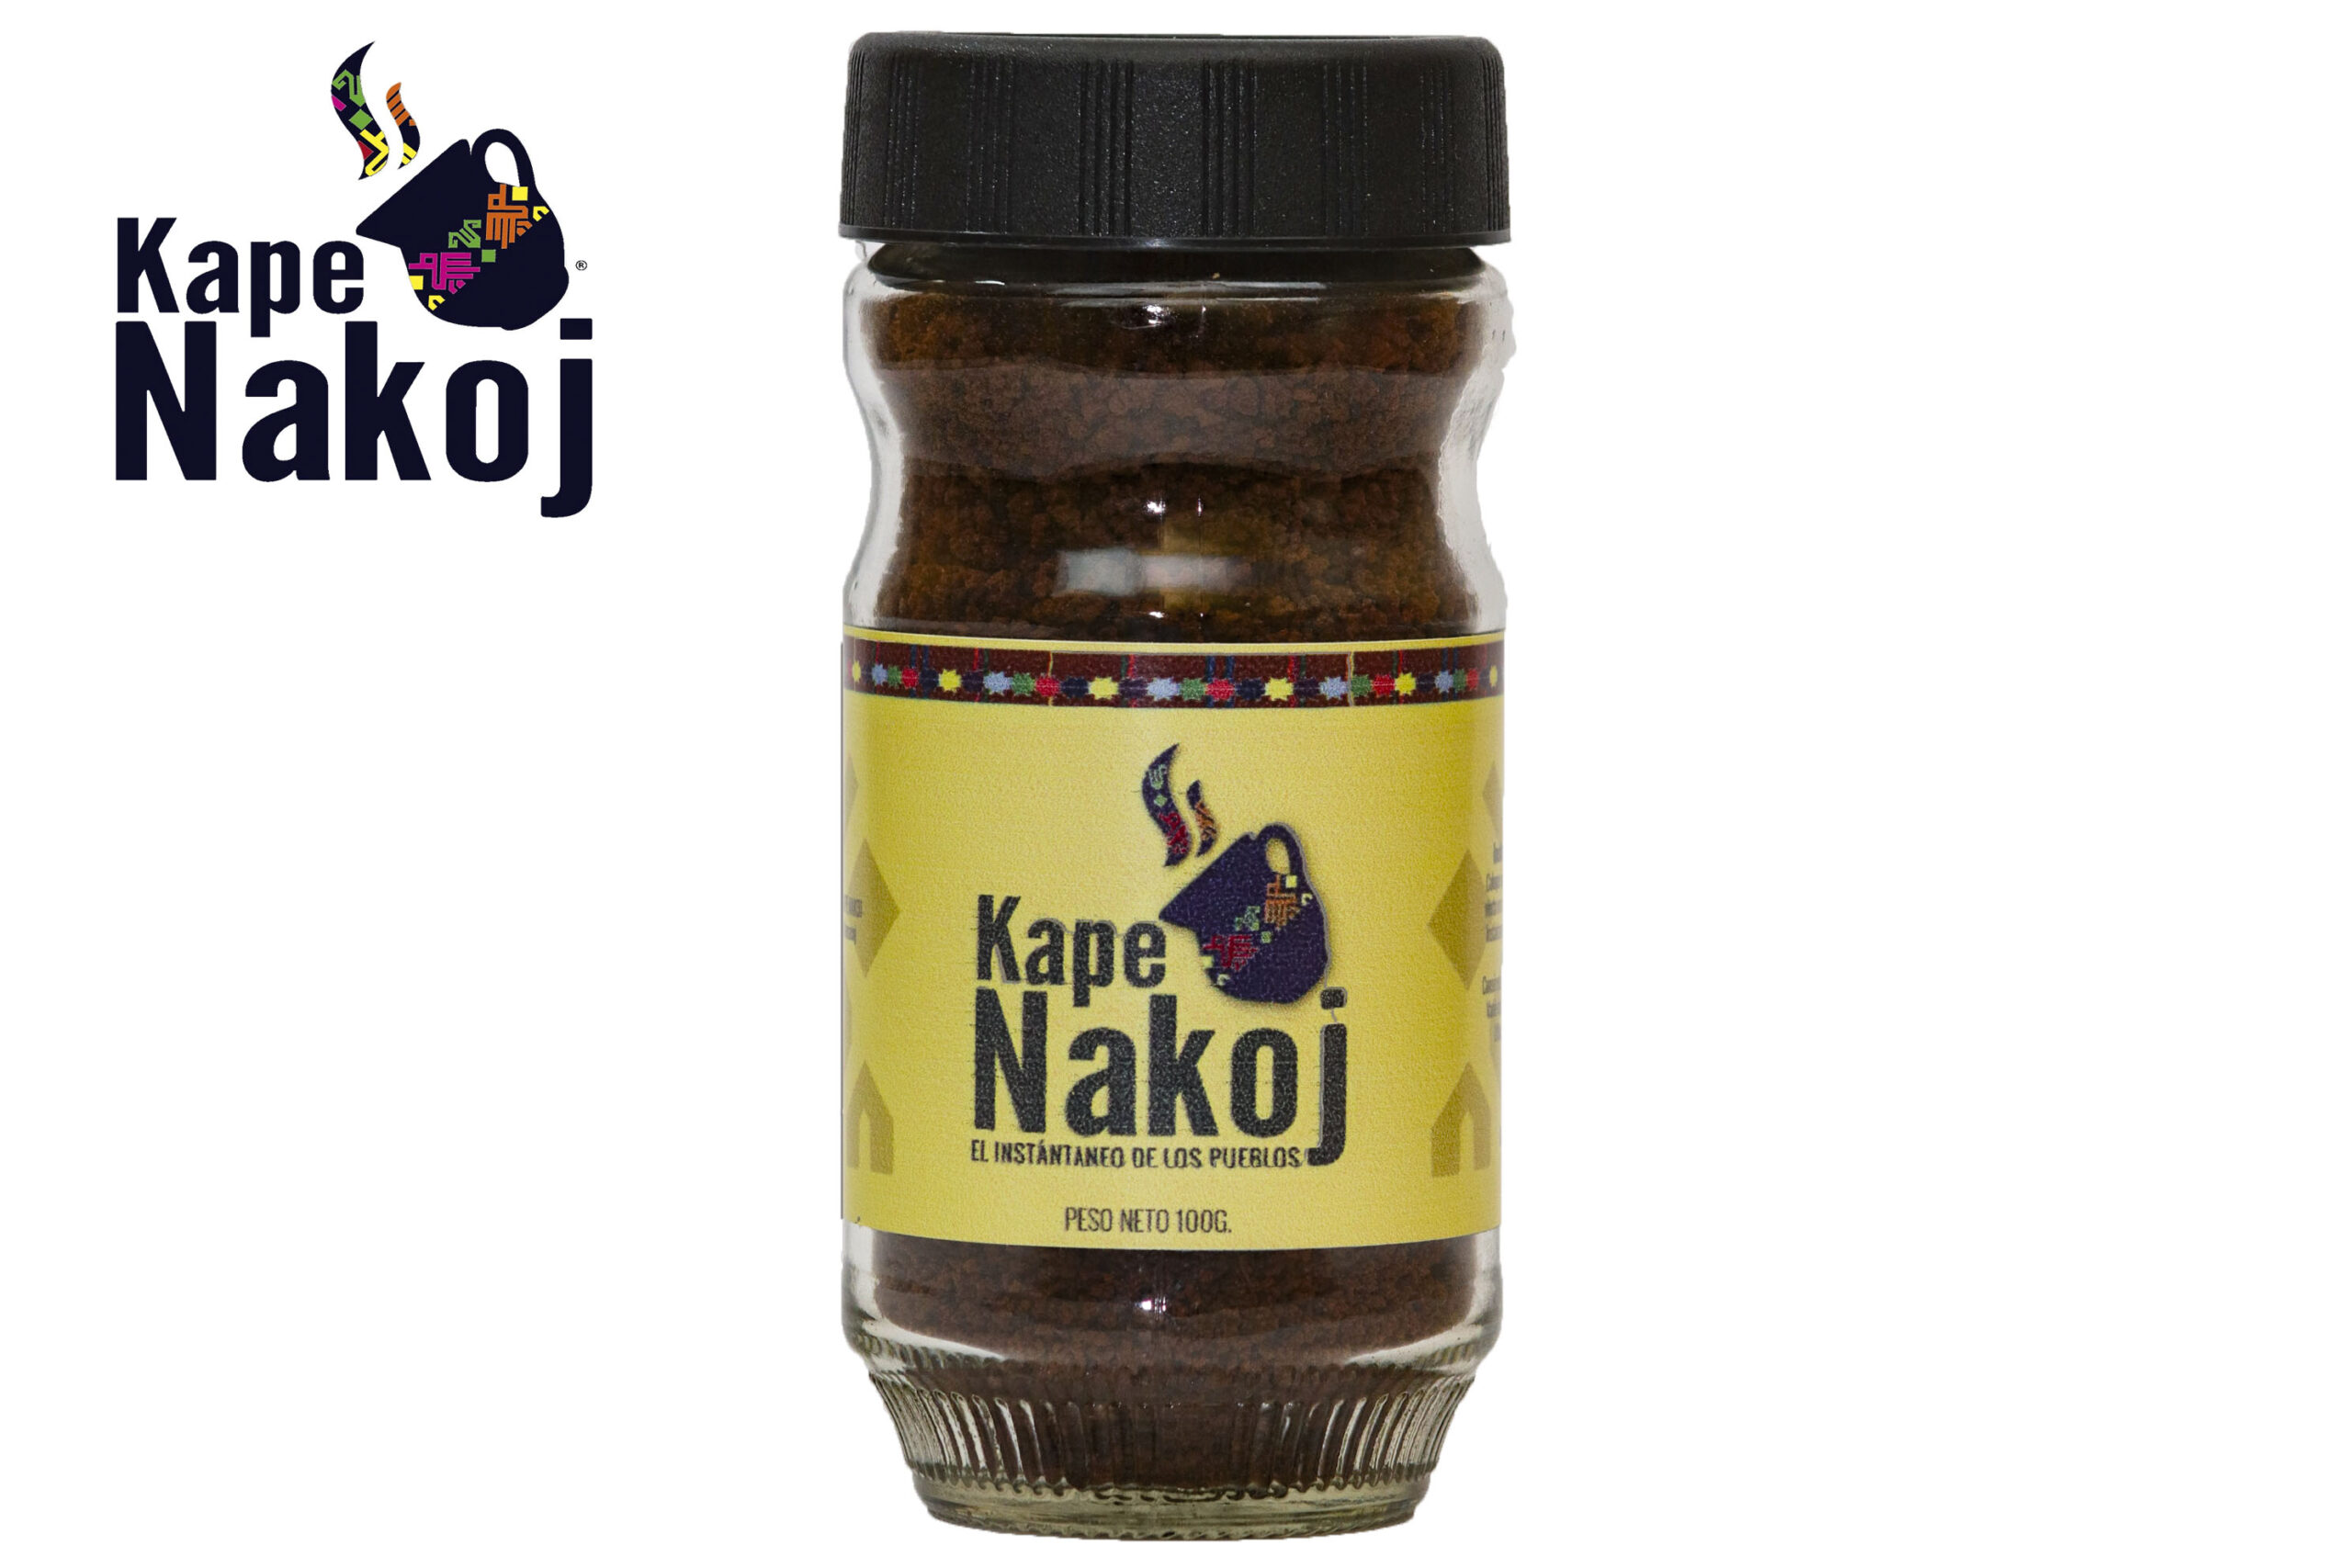 Kape Nakoj arabica instant coffee powder (e 100g), made from coffee beans from regions of Guatemala at over 1370 meters above sea level.